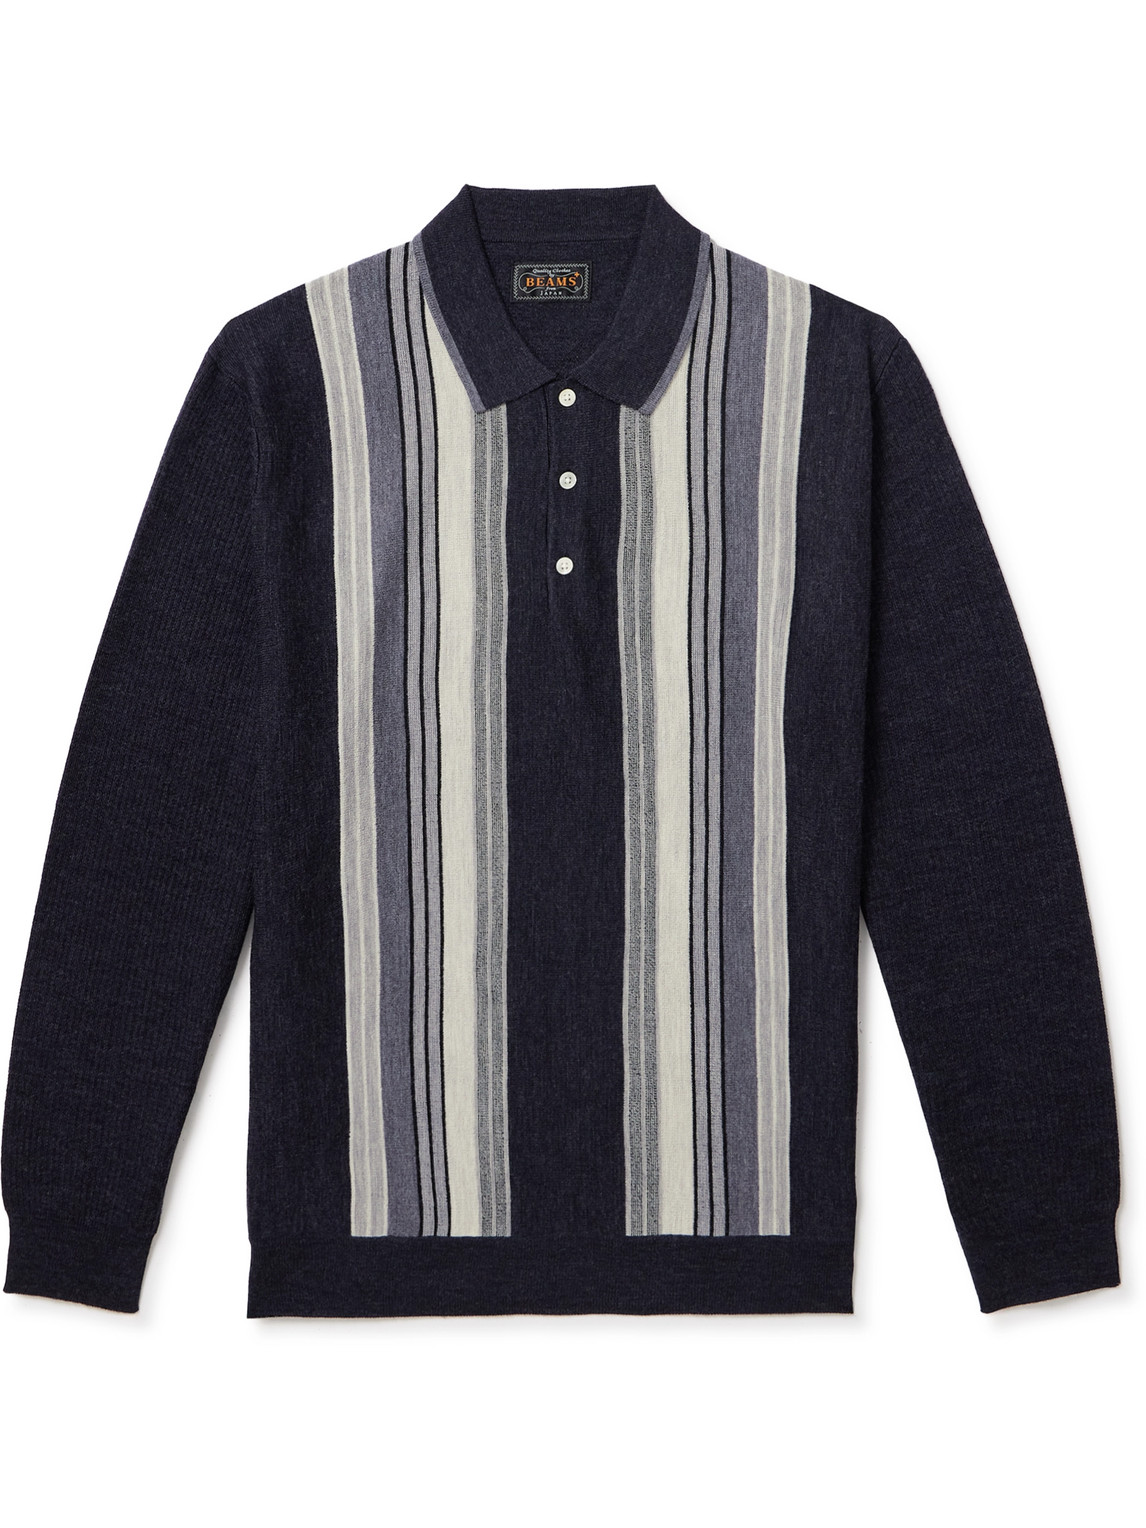 Beams Striped Wool Polo Shirt In Black